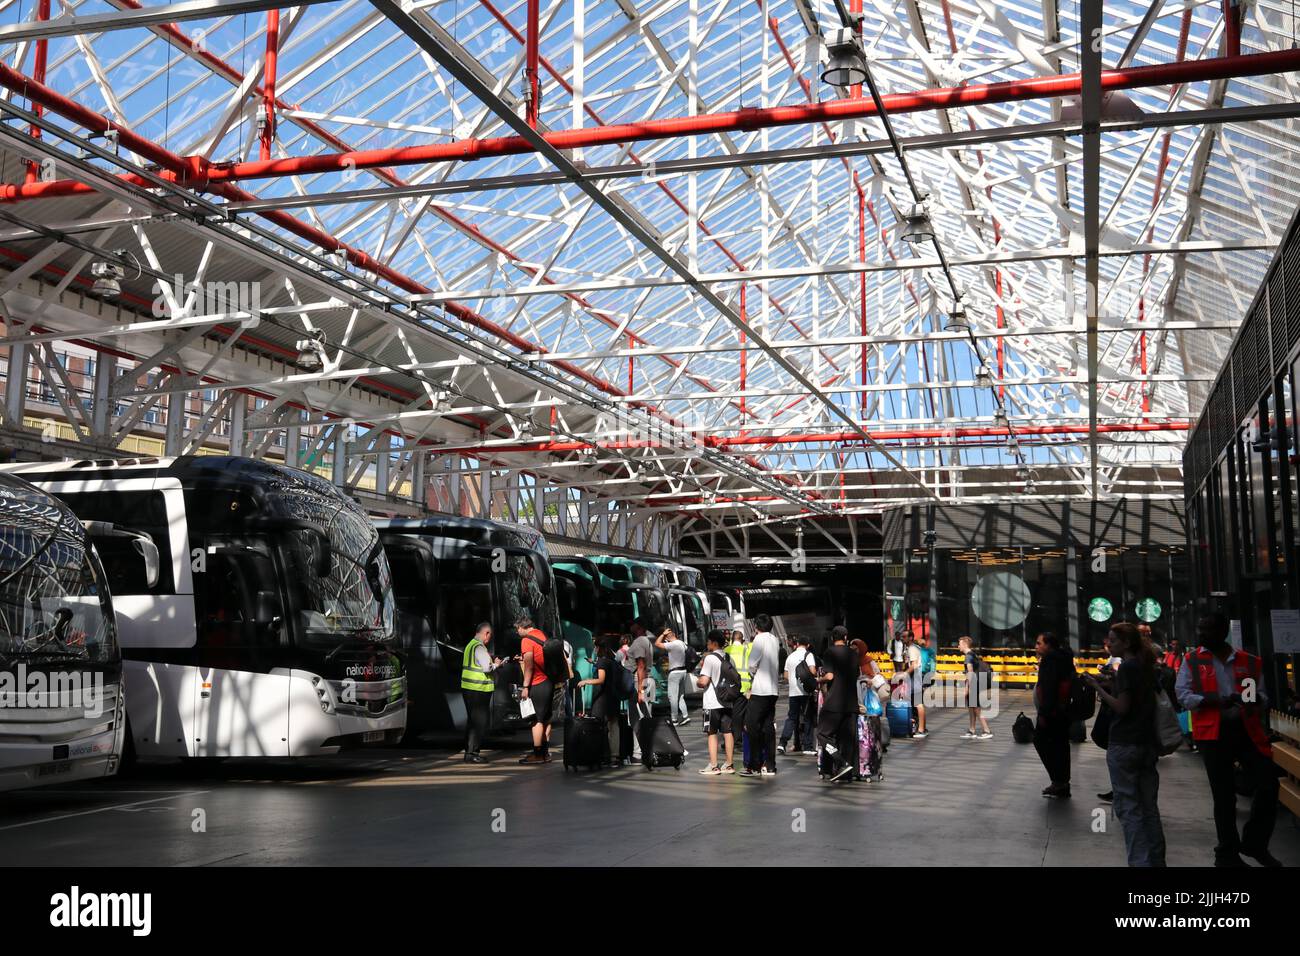 PASSENGERS BOARDING COACHES AT LONDON VICTORIA COACH STATION Stock Photo